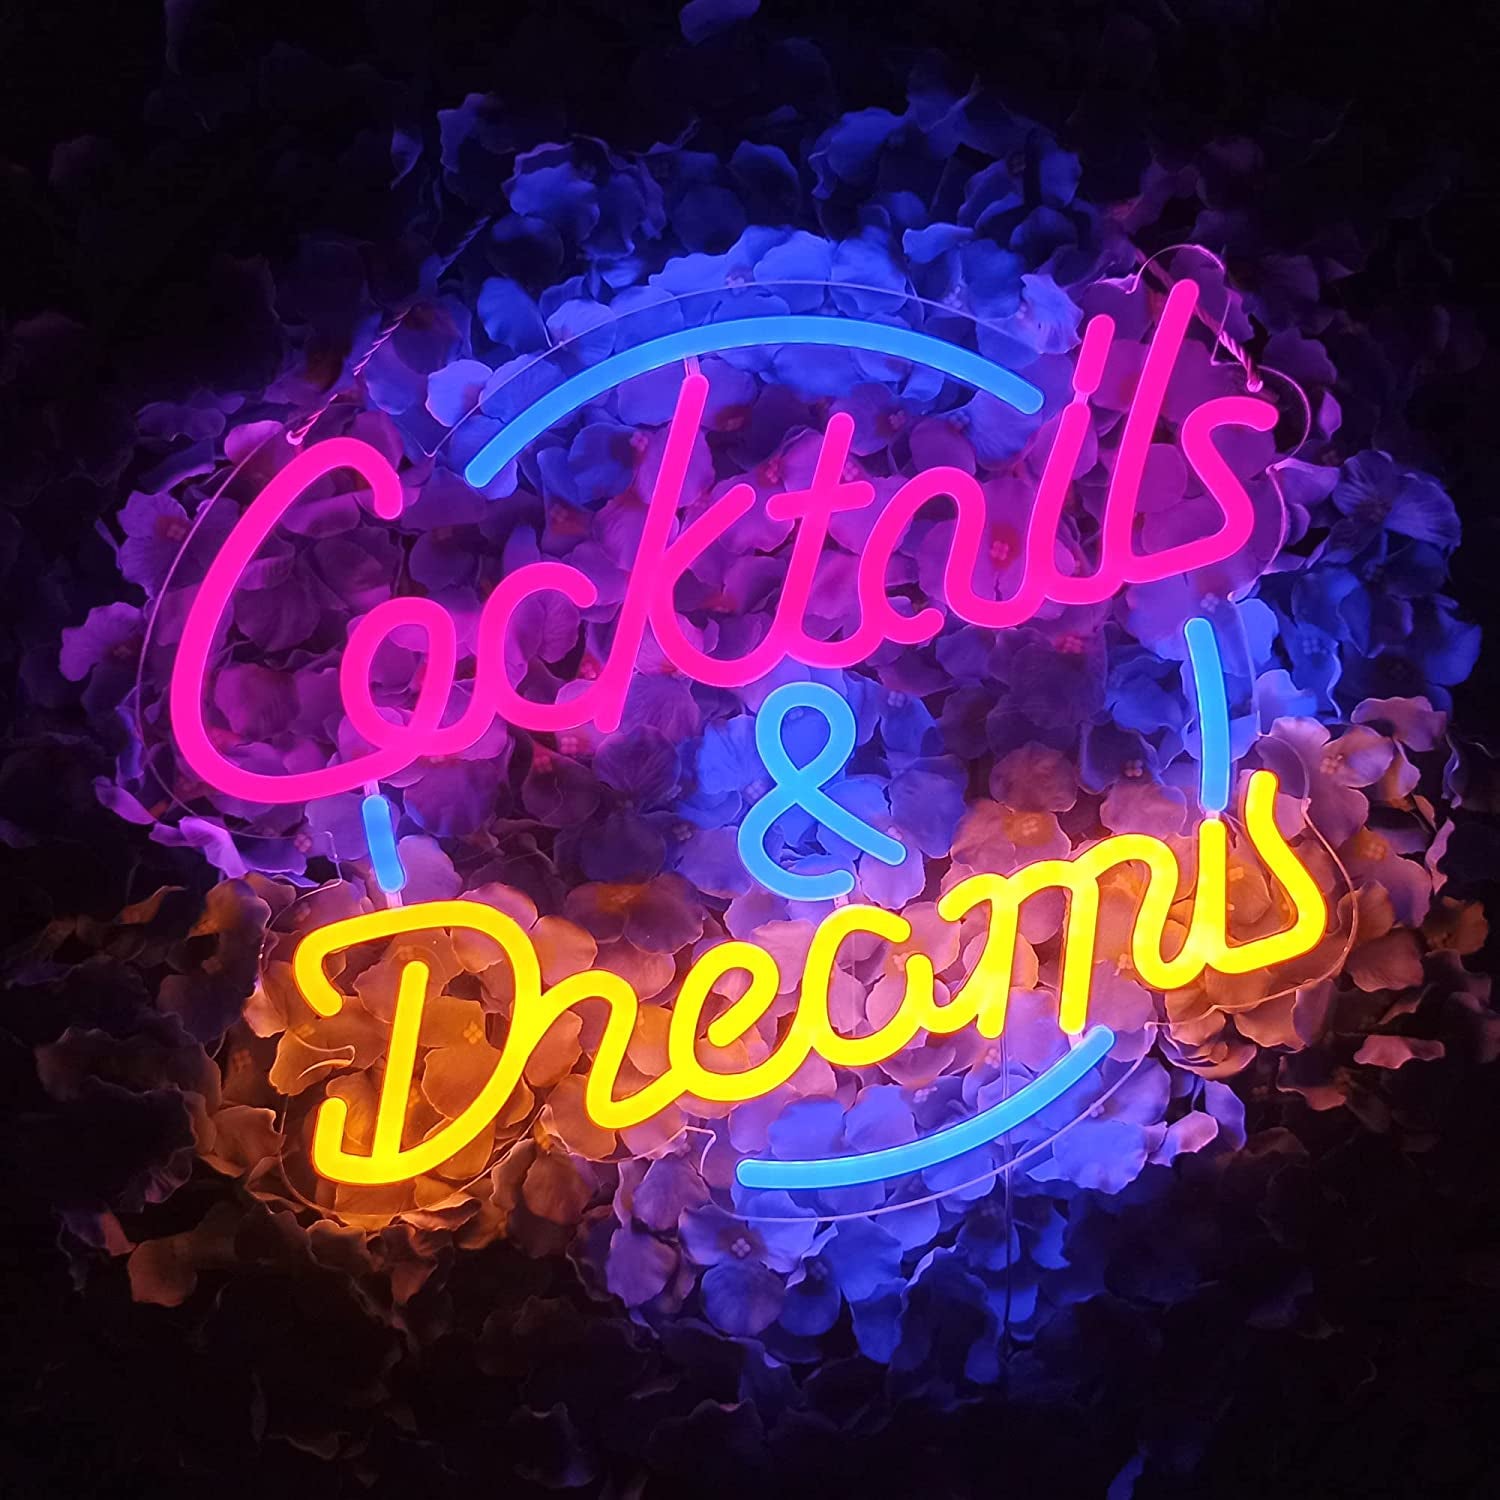 Cocktails Dreams Neon Sign,Innovative Integral Forming Process,With Dimmable Switch for All Holiday Party and Home Decoration,17×13Inch,Colorful